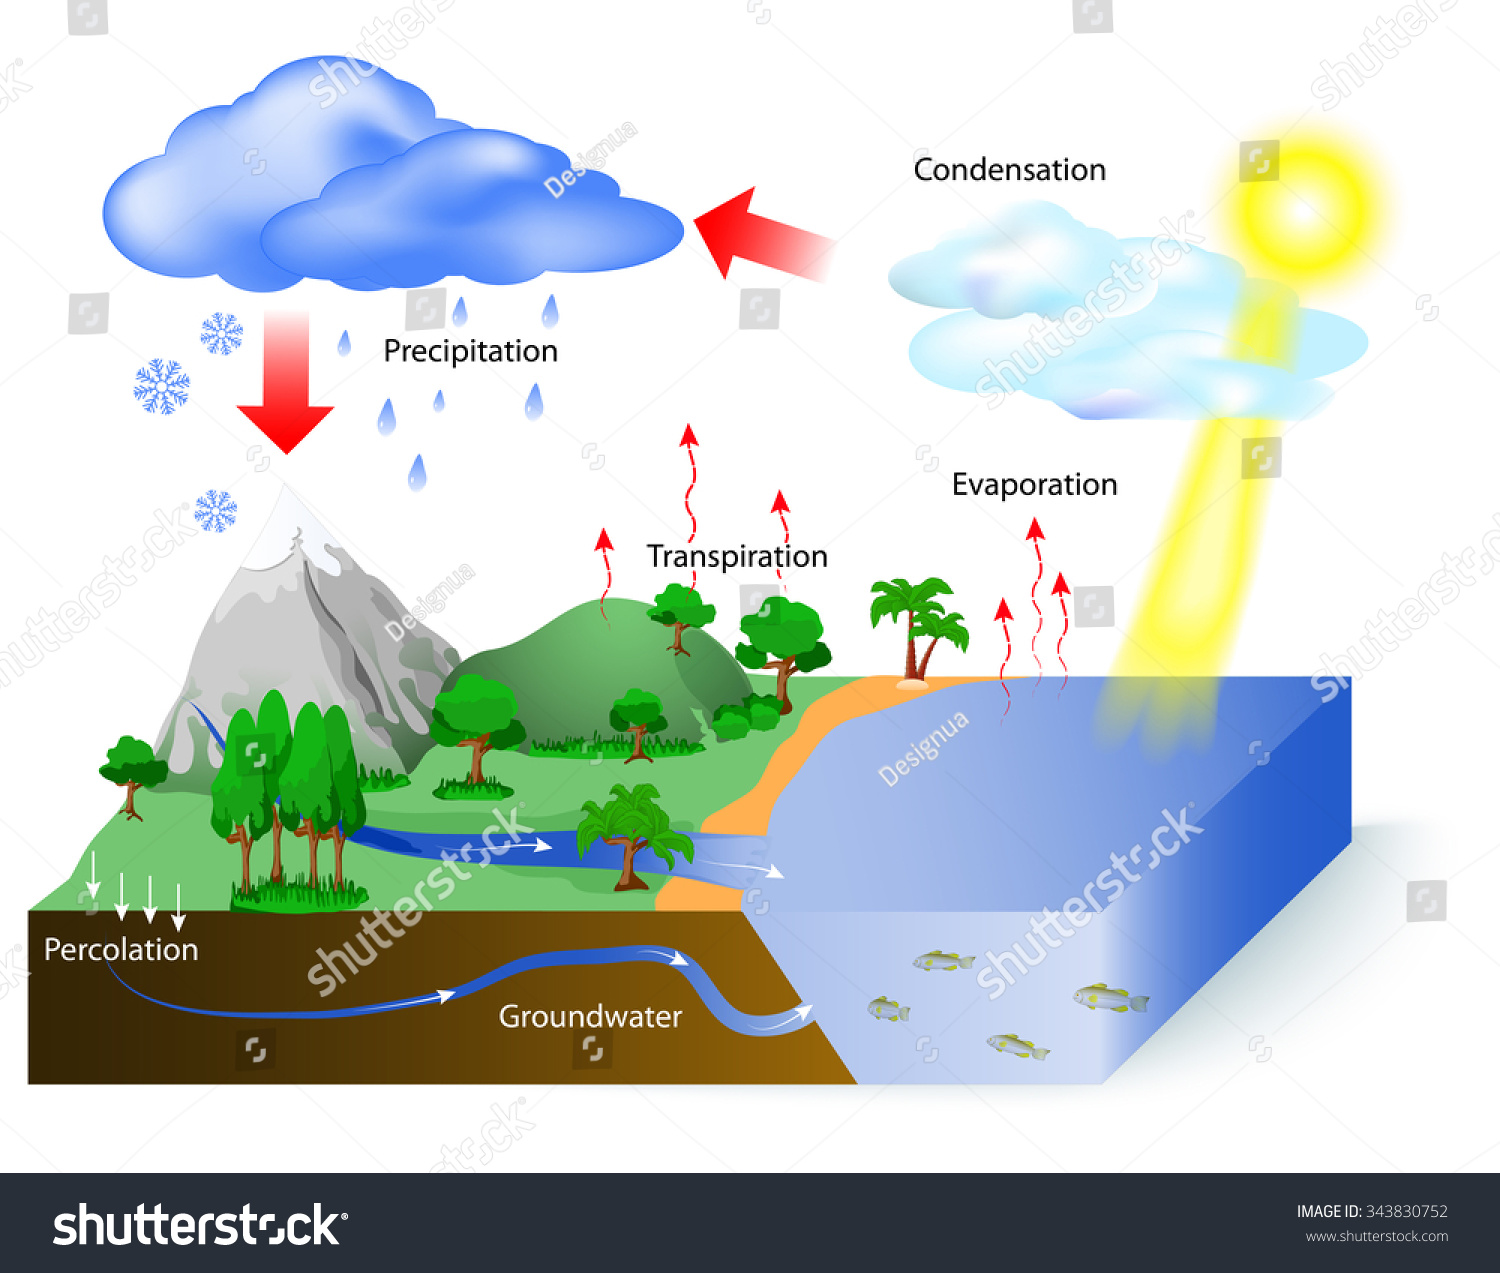 Water Cycle Diagram Sun Which Drives Stock Illustration ... simplified diagram of global warming 